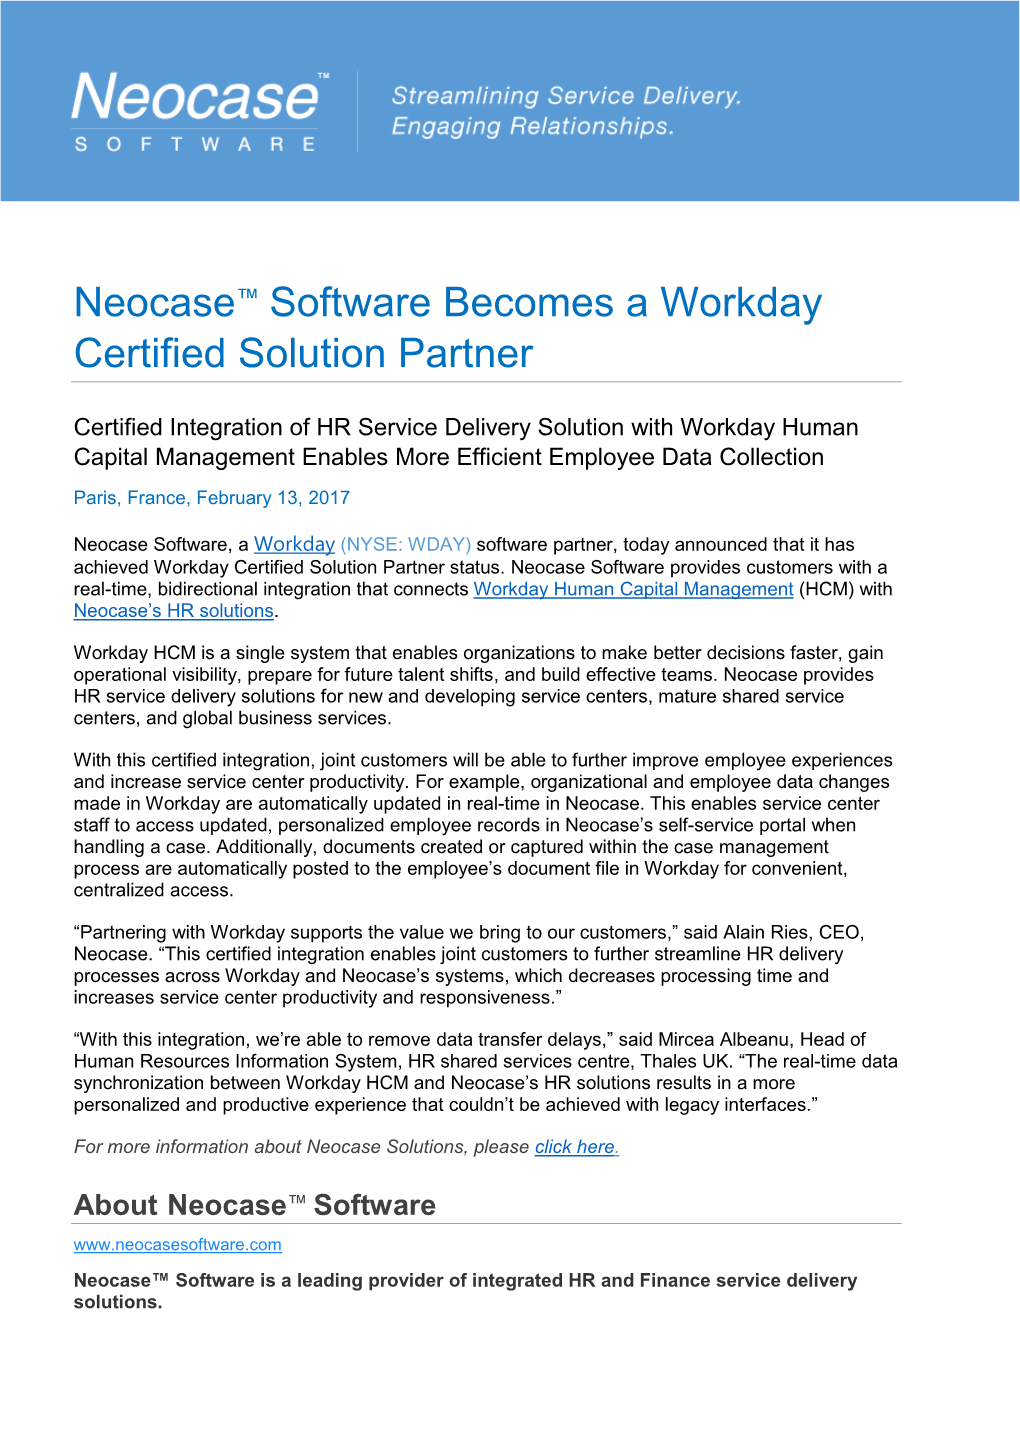 Neocase™ Software Becomes a Workday Certified Solution Partner